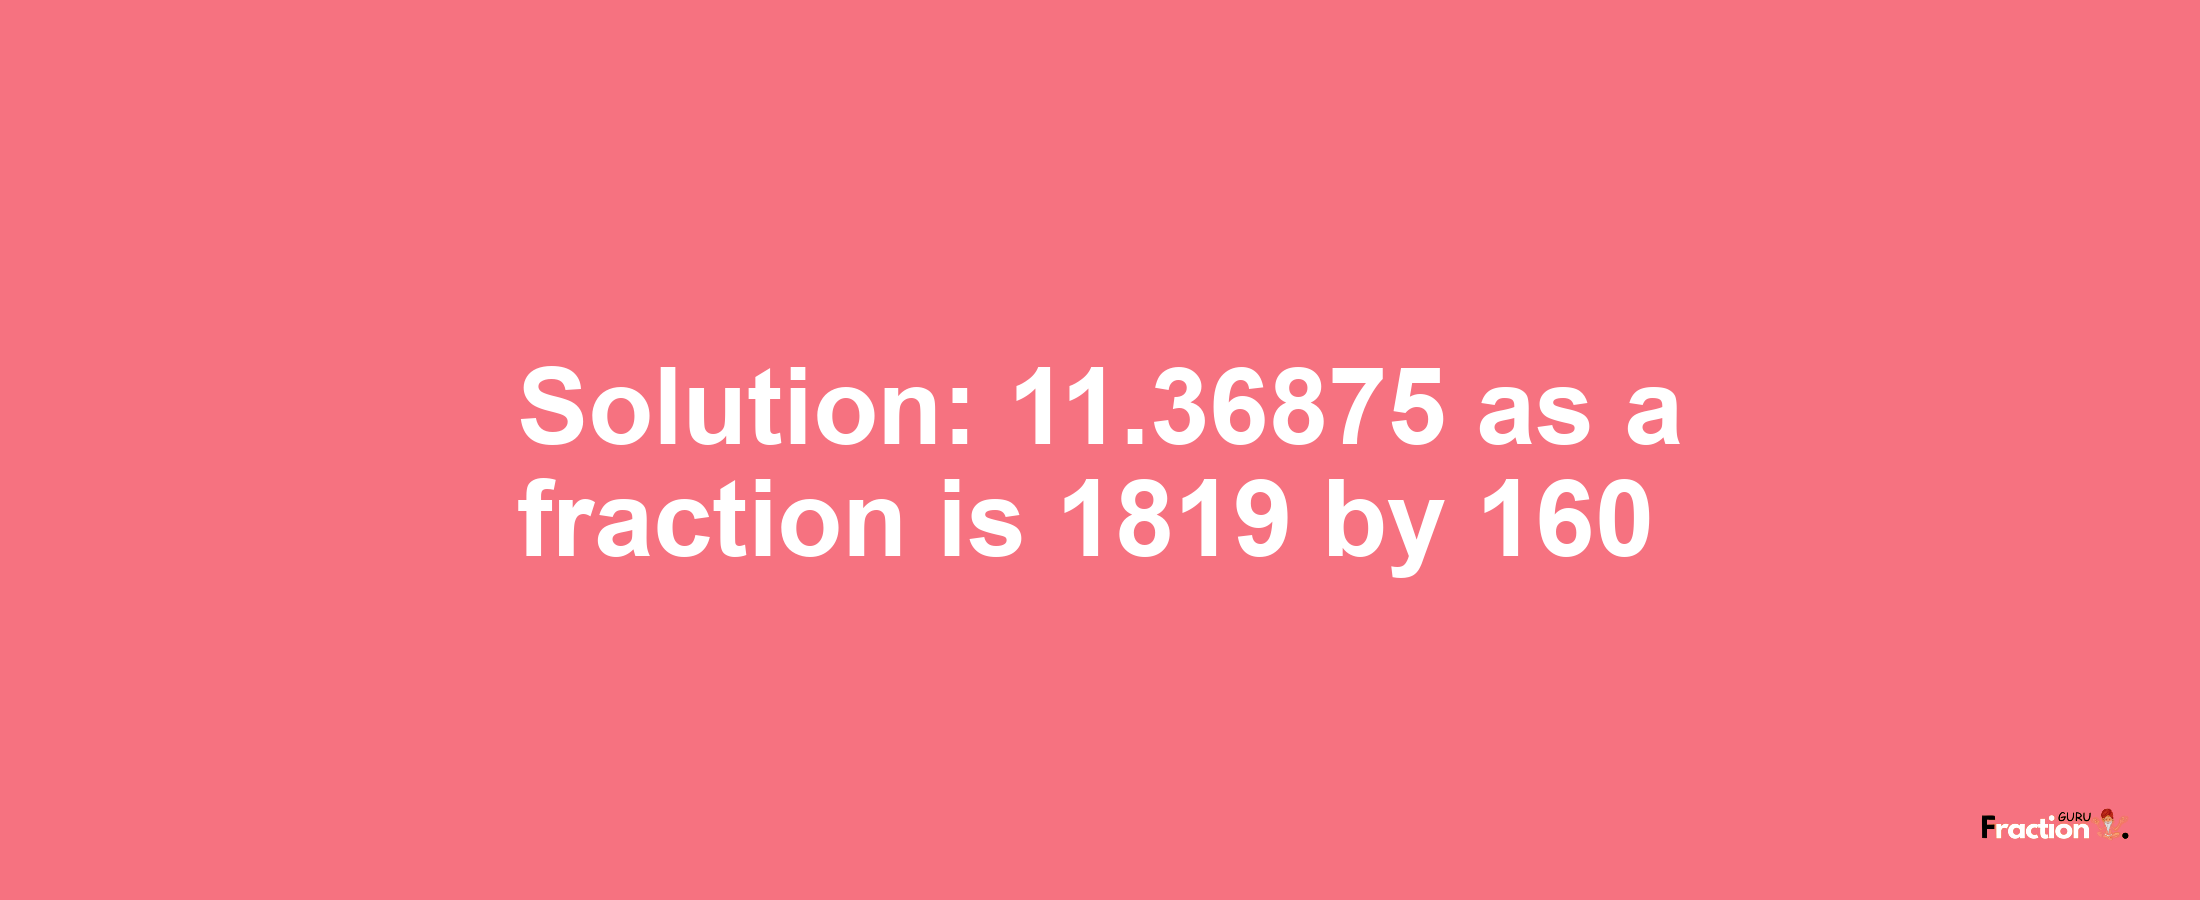 Solution:11.36875 as a fraction is 1819/160